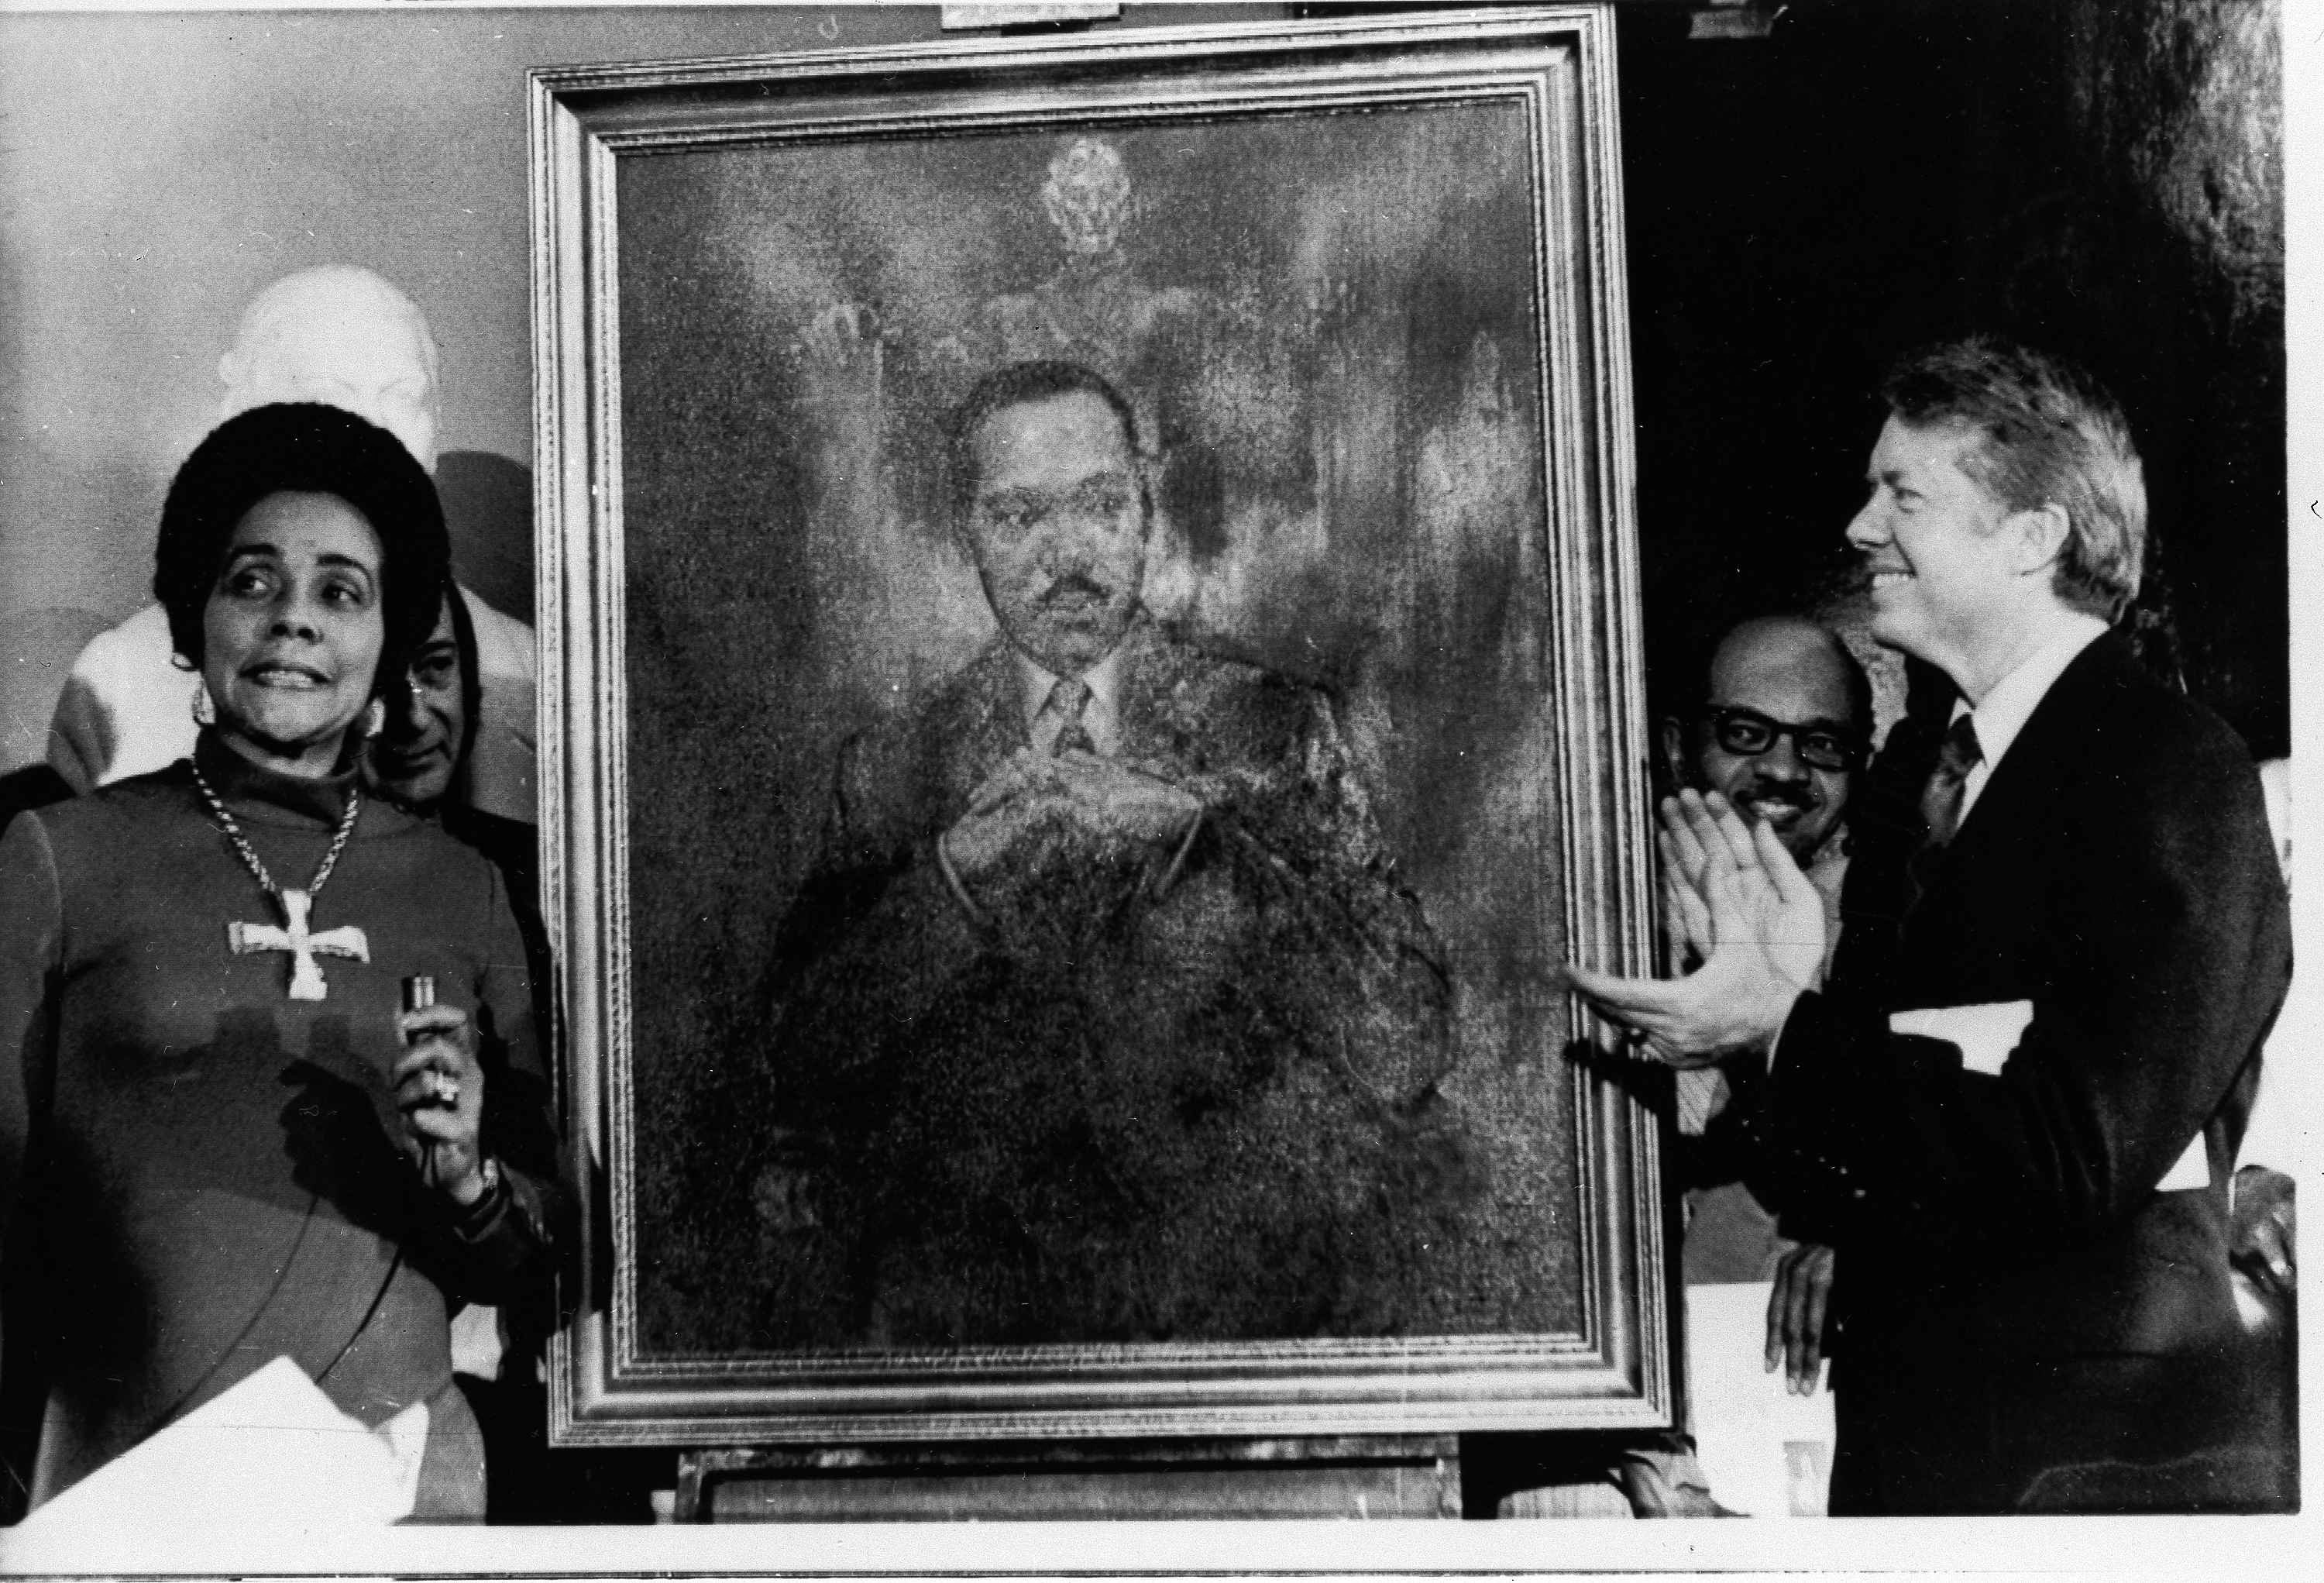 Coretta Scott King, widow of slain civil rights leader Dr. Martin Luther King, Jr., speaks at an unveiling of a portrait of Dr. King by artist George Mandus, Feb. 18, 1974, and dedicated by Gov. Jimmy Carter. (AP)